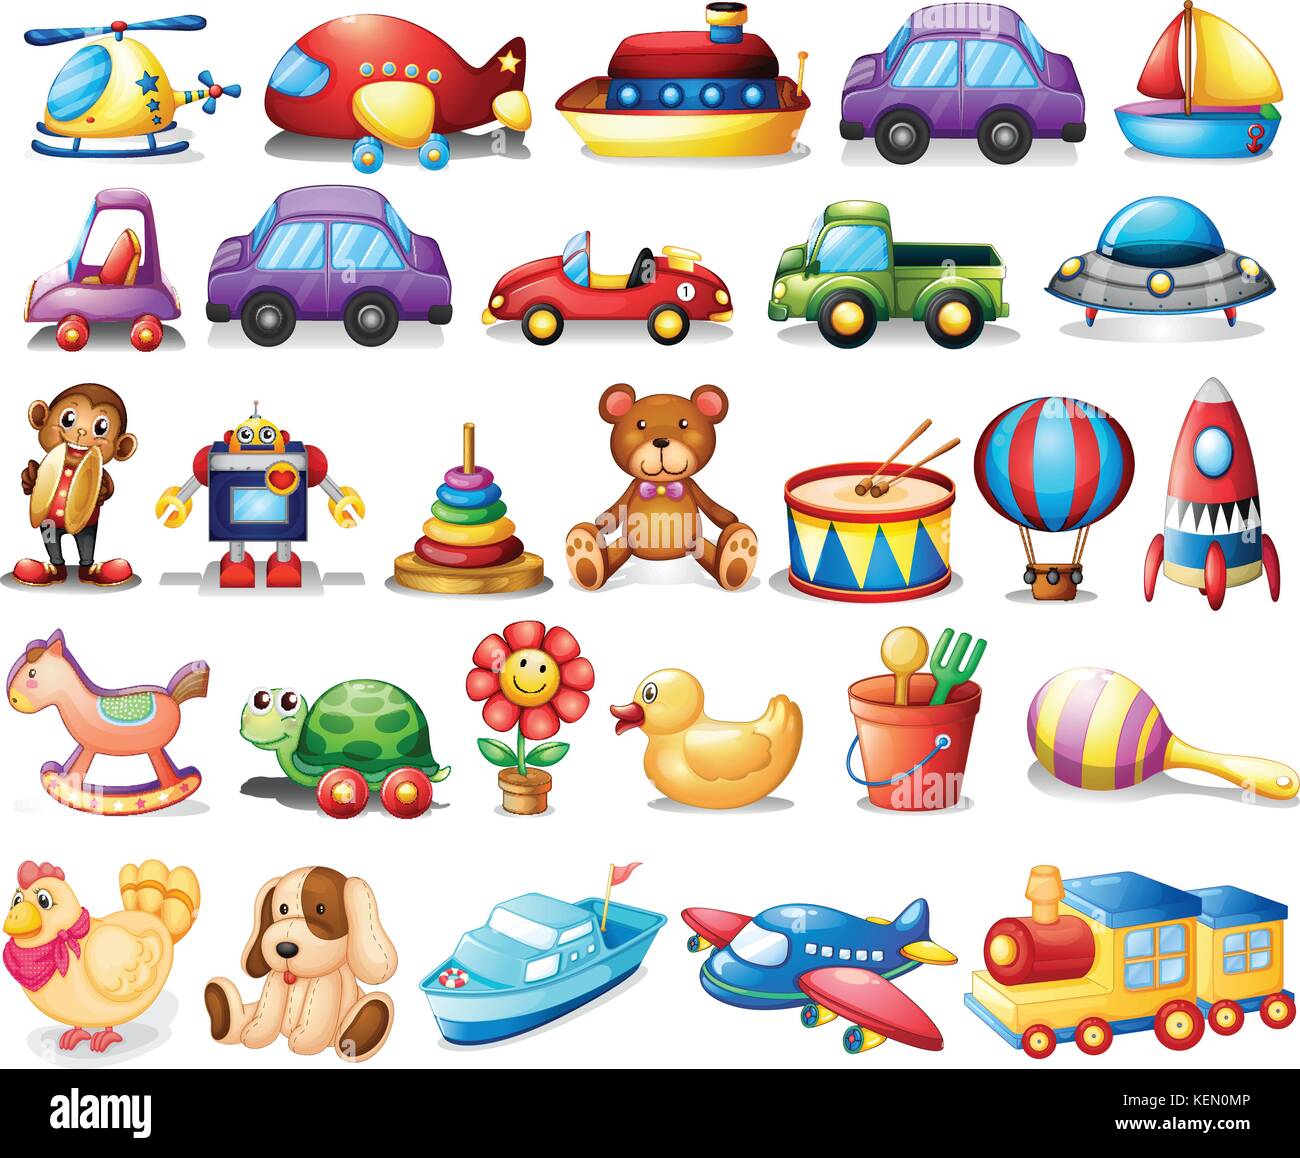 Illustration of the collection of toys on a white background Stock Vector